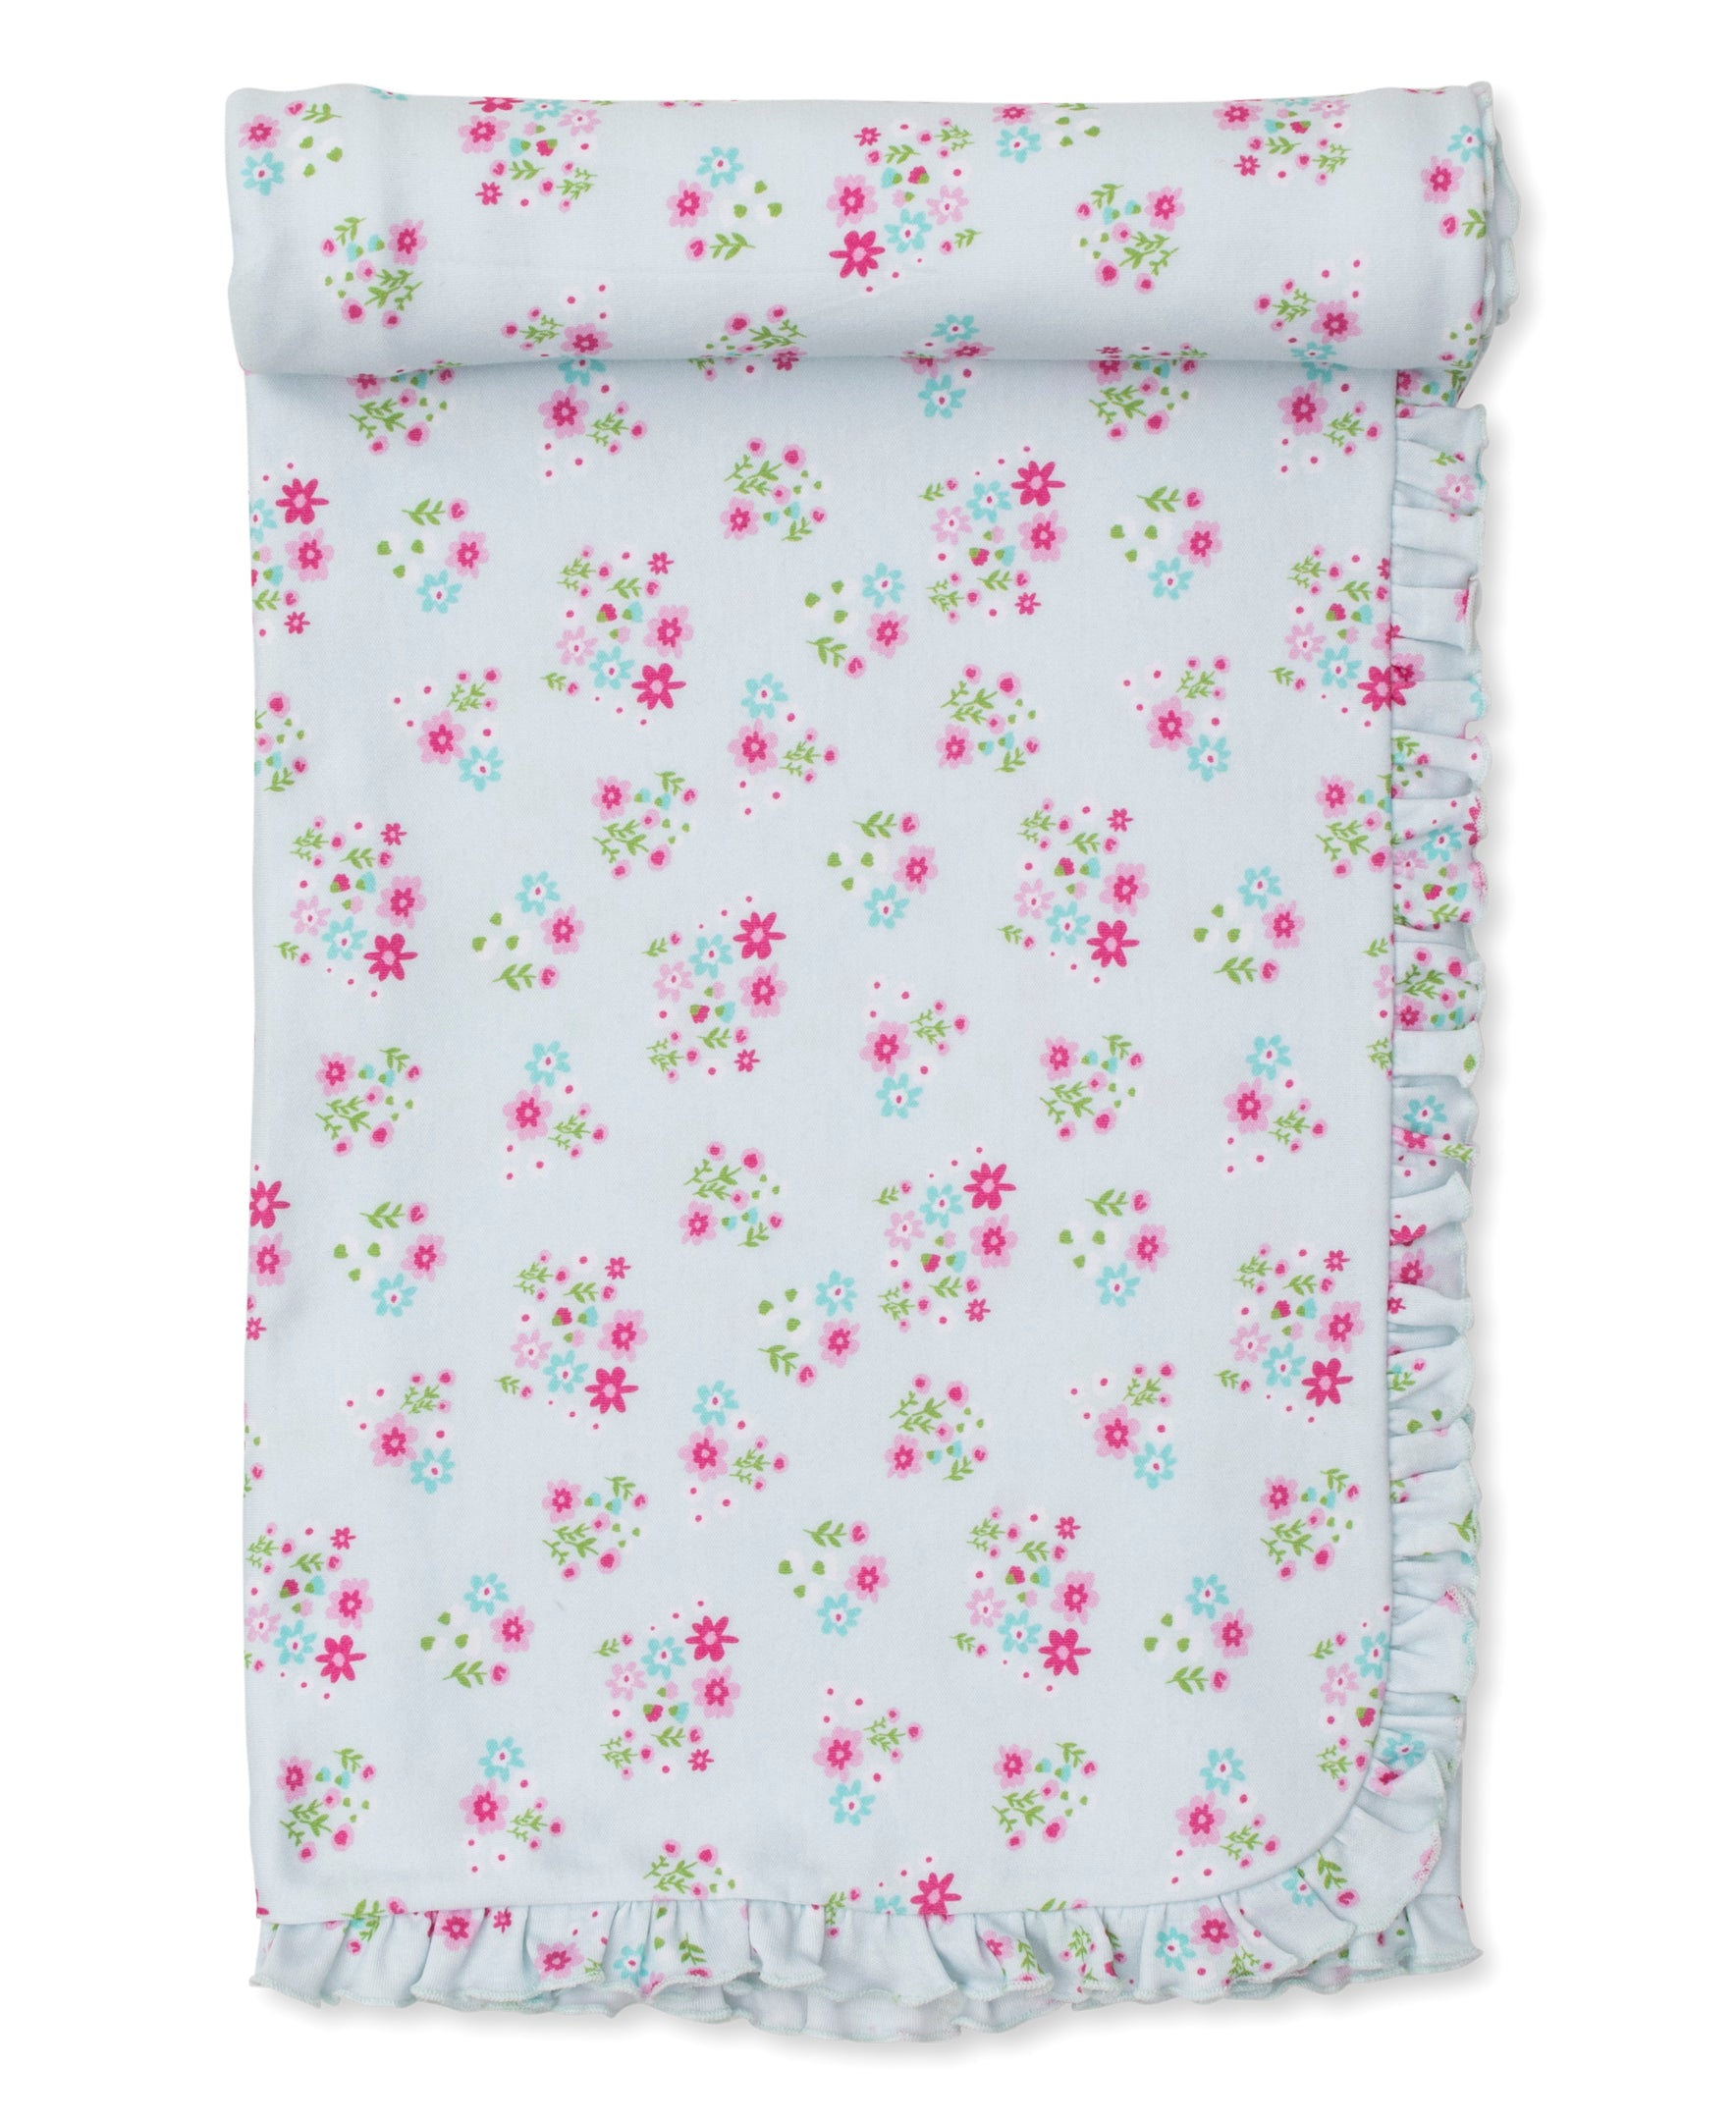 Bunny Blossoms Baby Blanket